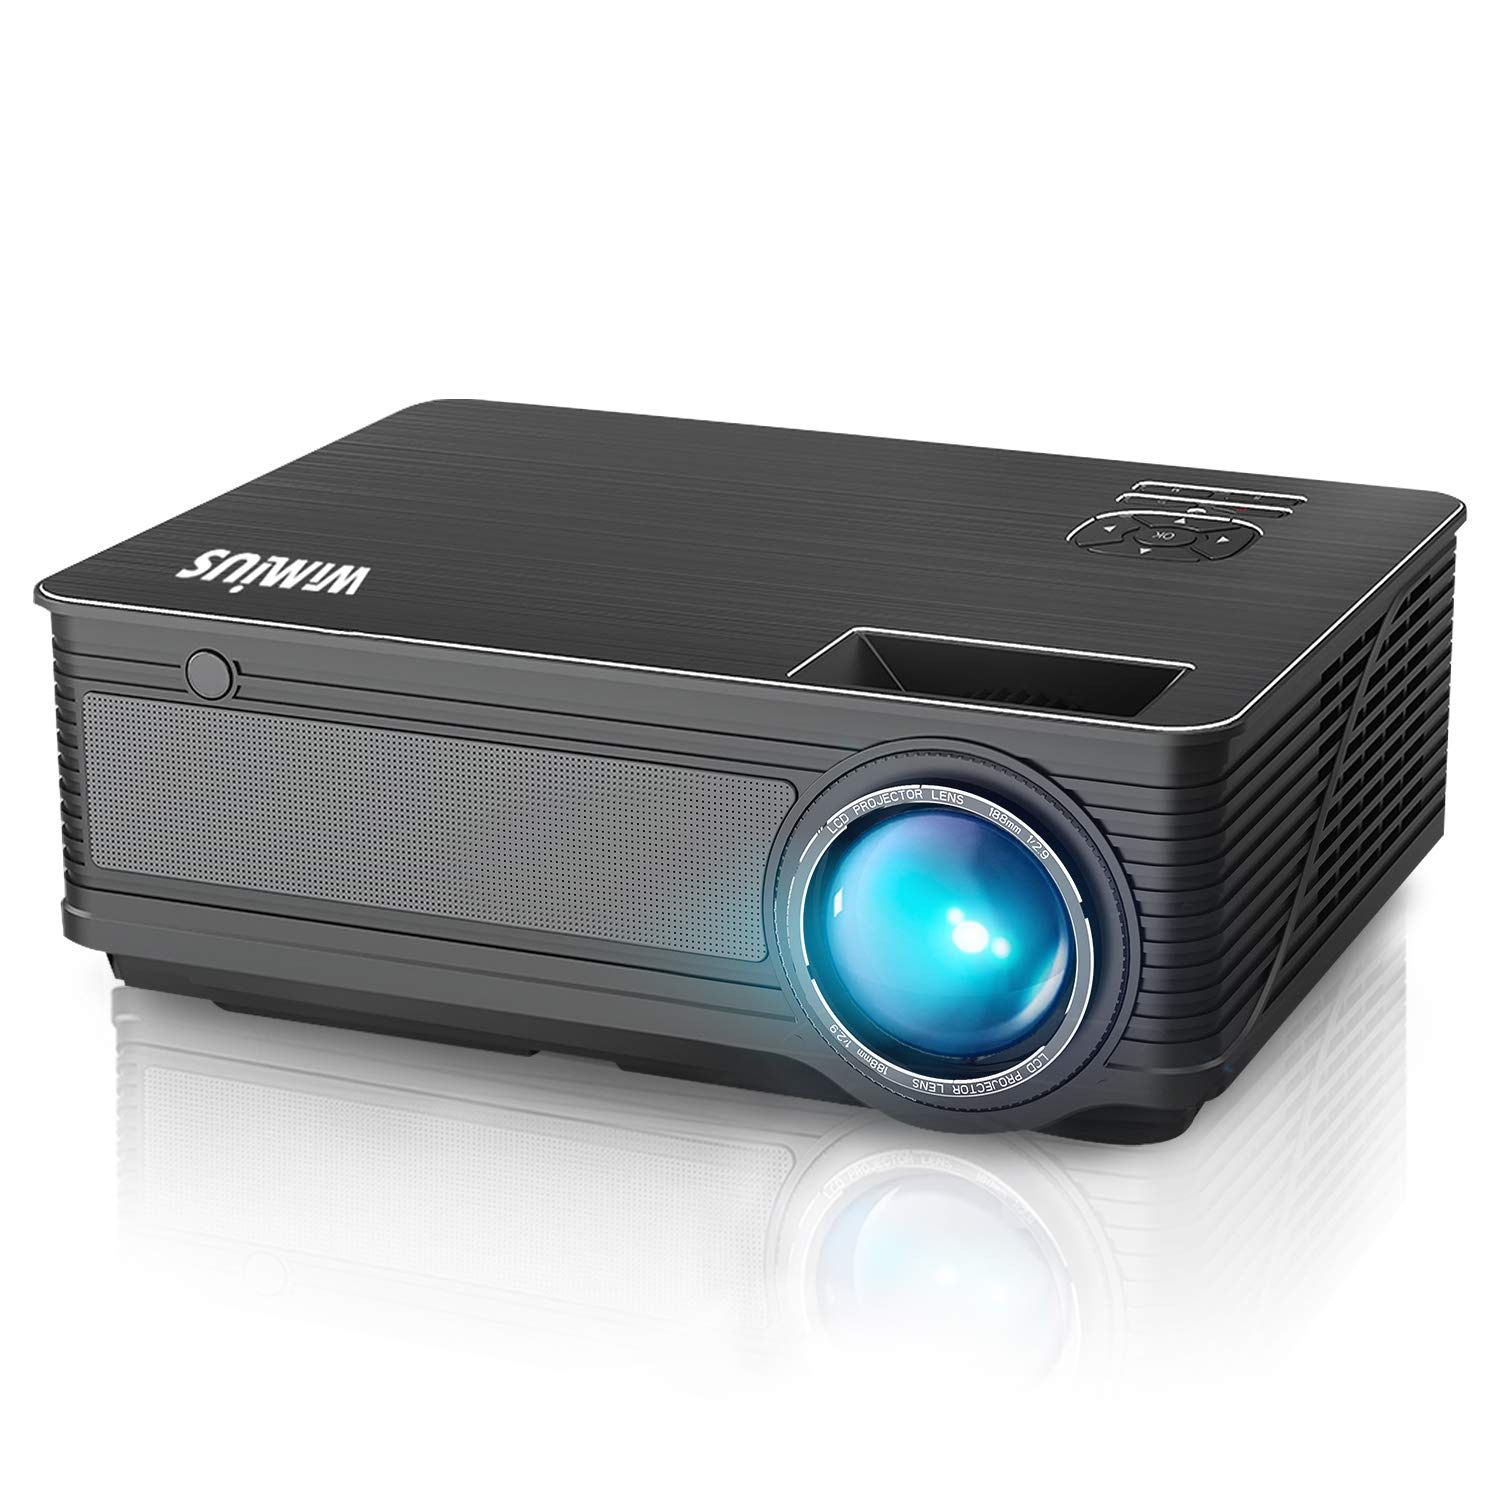 New Projector, WiMiUS P18 Upgraded 4200 Lumens LED Projector Support 1080P 200" Display 50,000H LED Compatible with Amazon Fire TV Stick Laptop iPhon